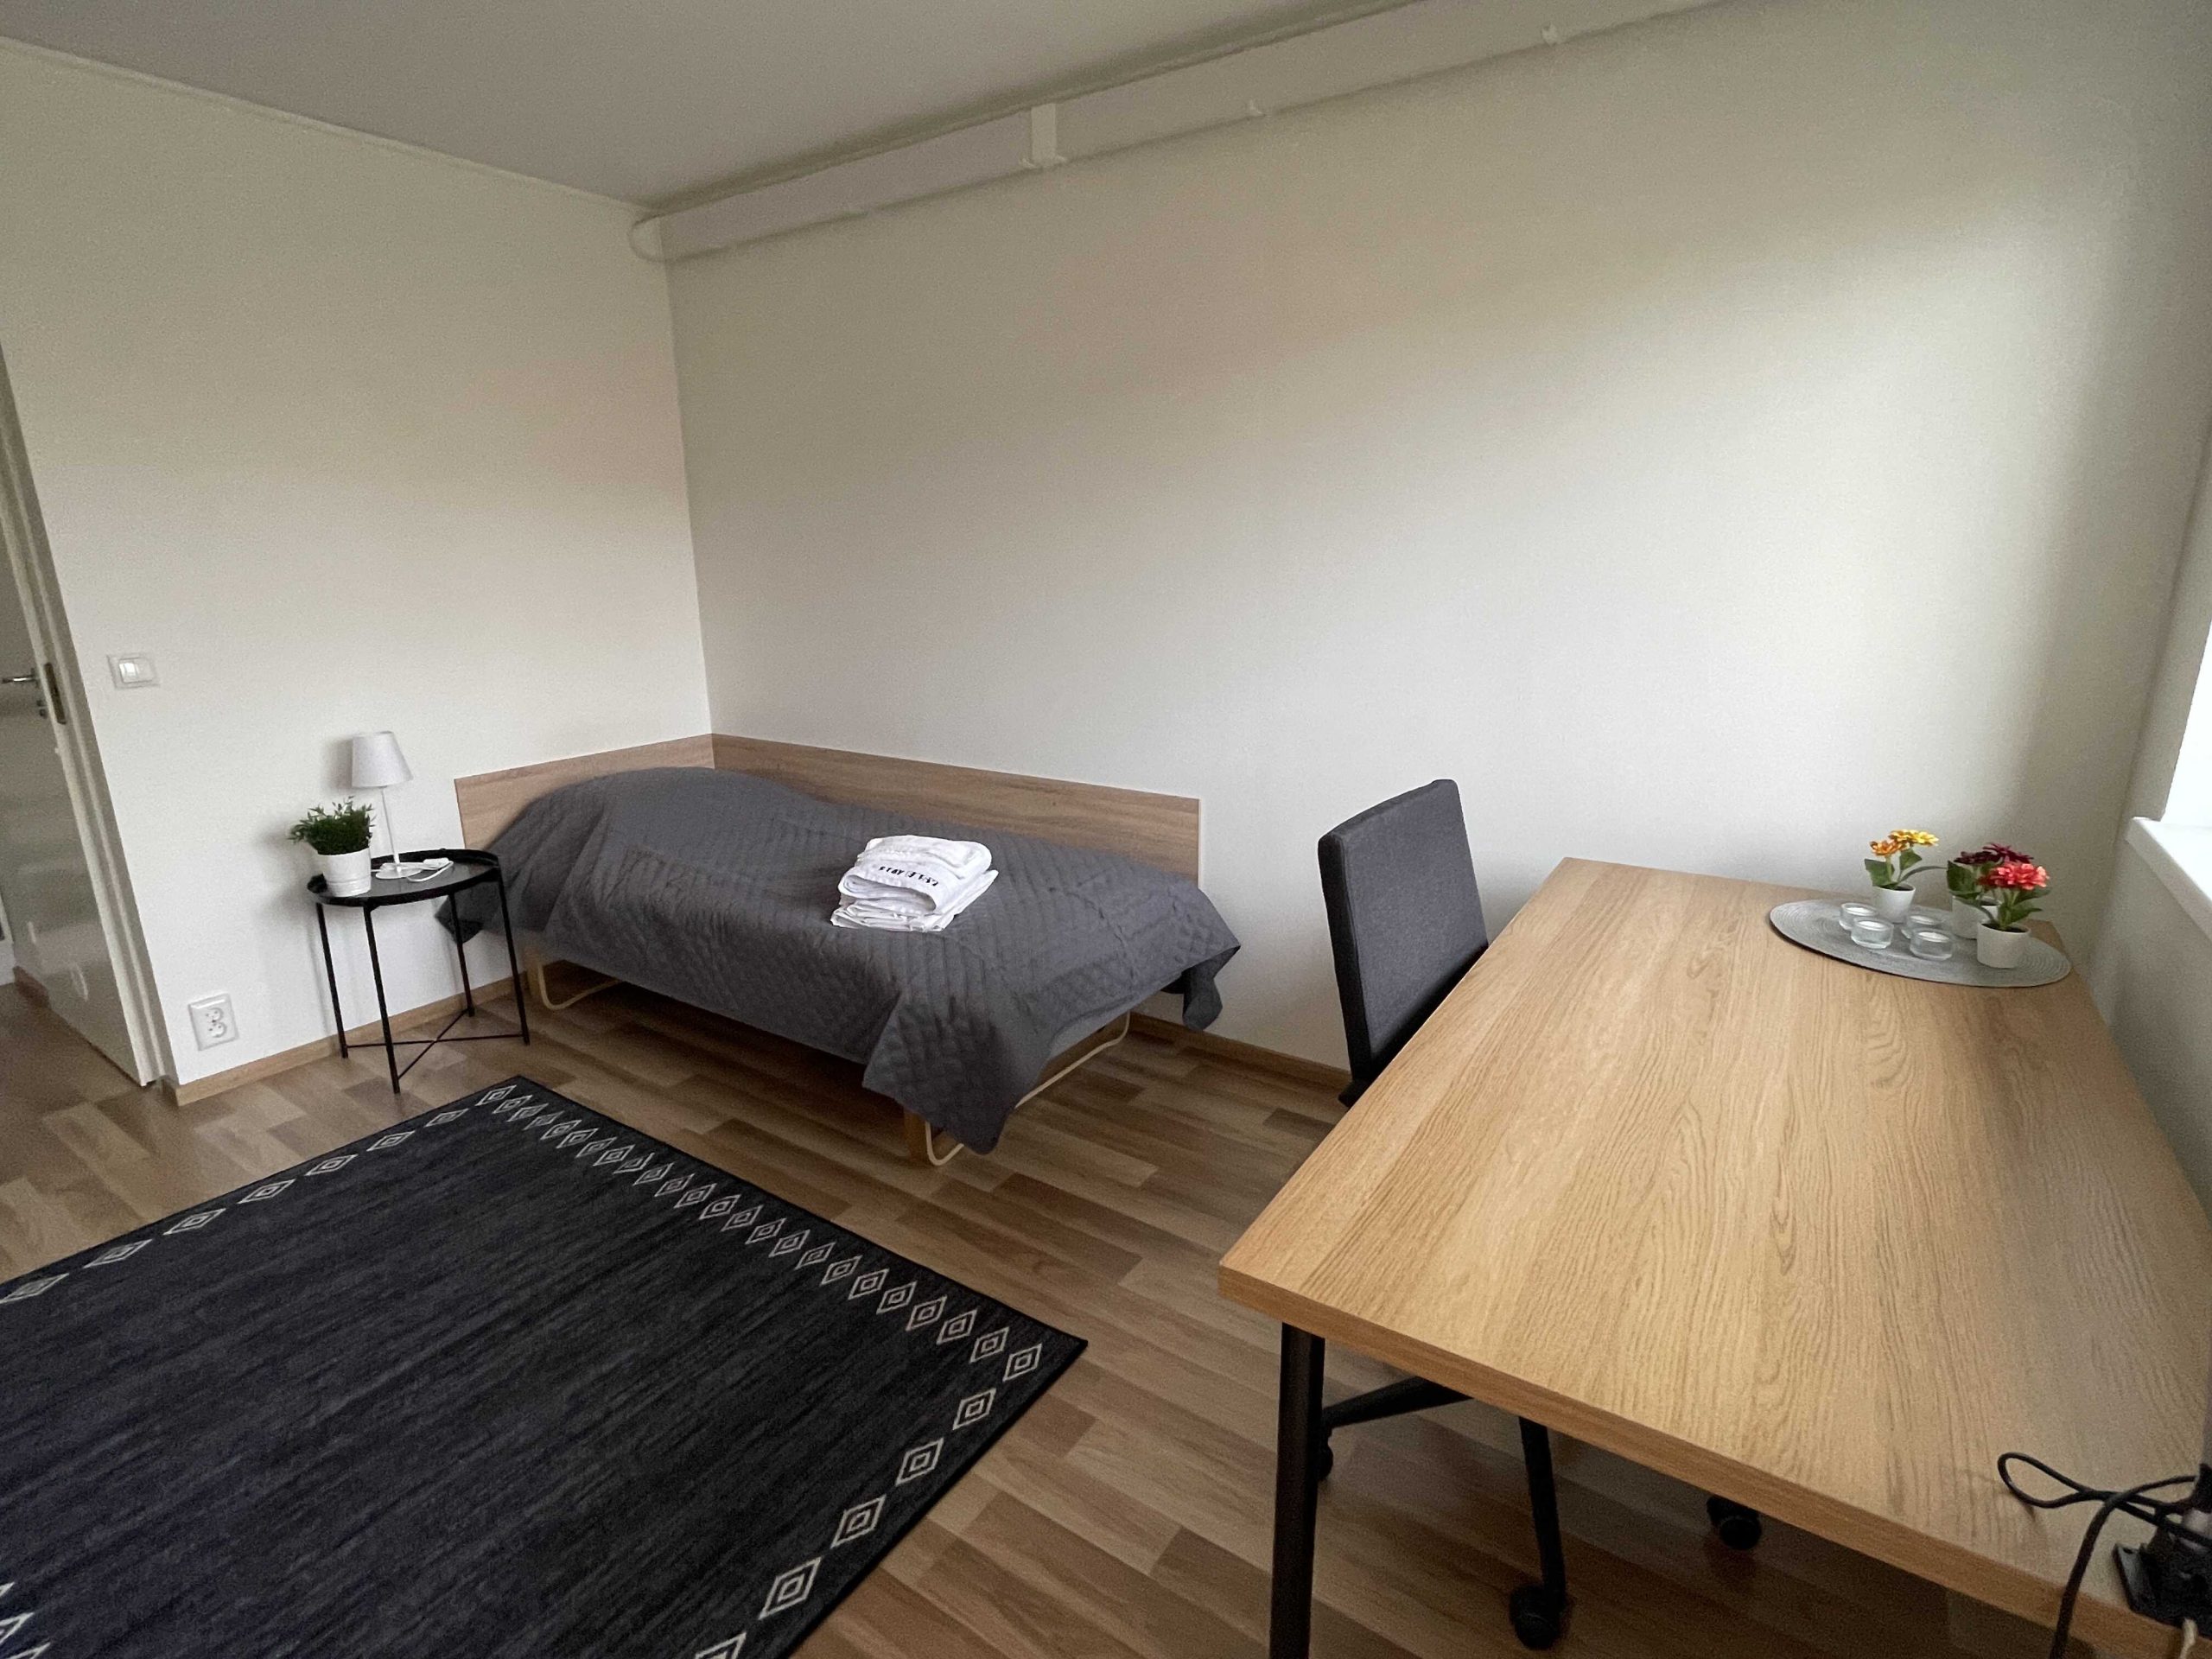 Serviced apartment, business accommodation, long stay, stay easy